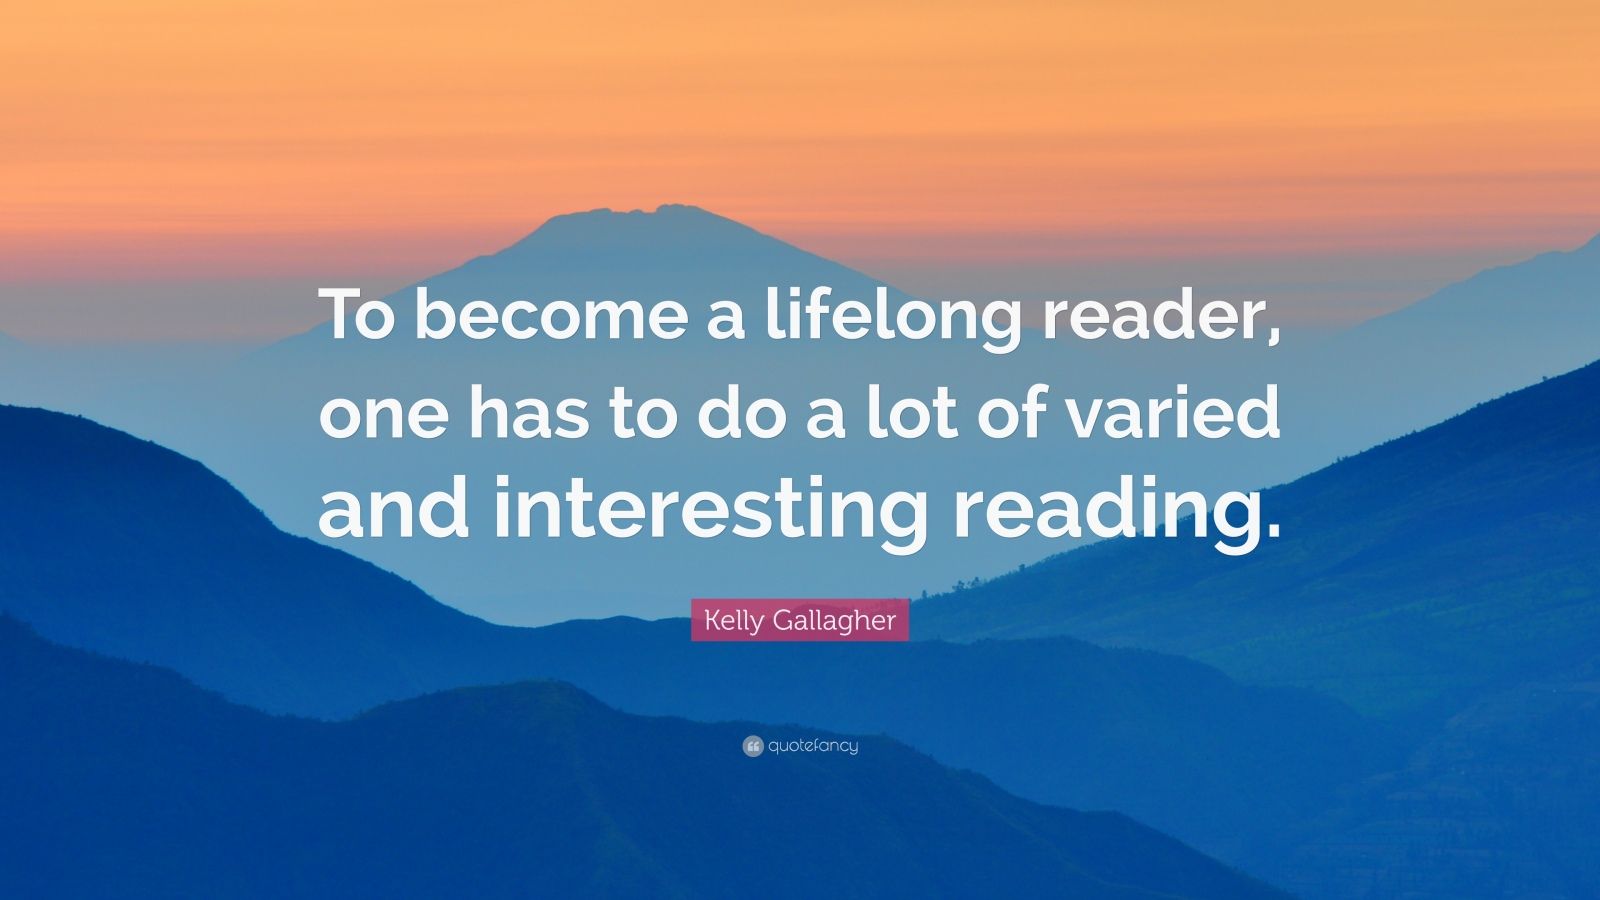 Kelly Gallagher Quote: “To become a lifelong reader, one has to do a ...